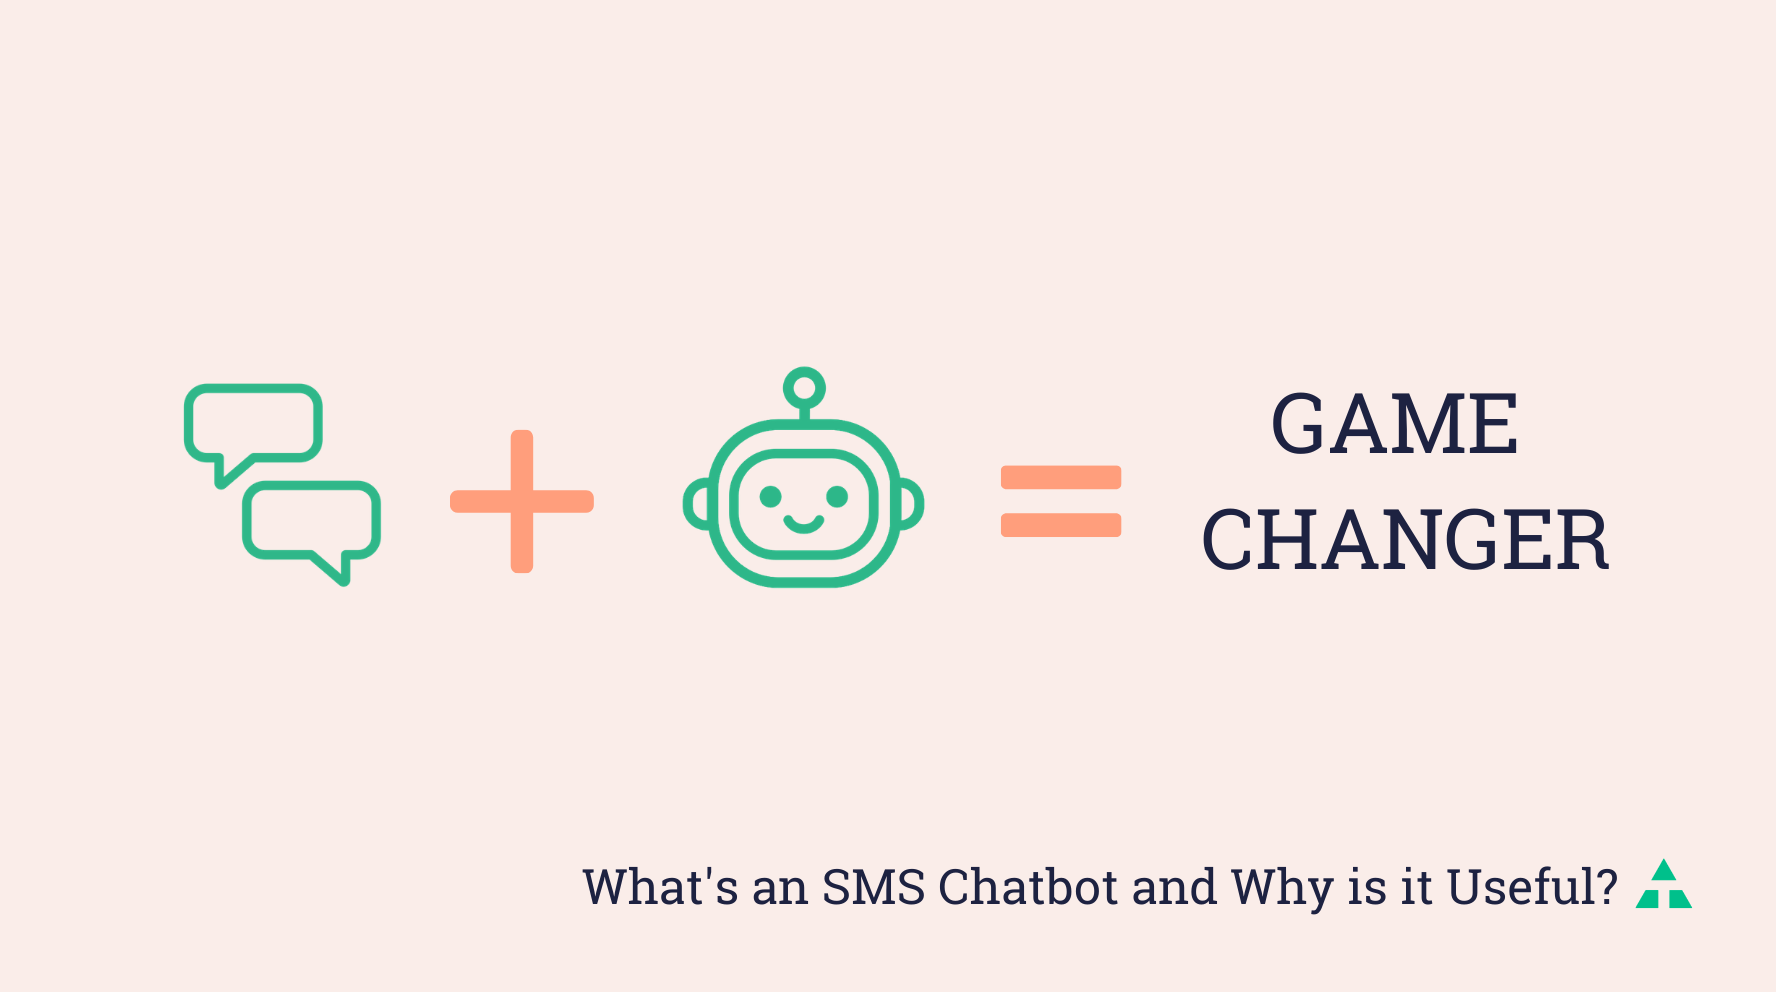 What's an SMS Chatbot and Why is it Useful?